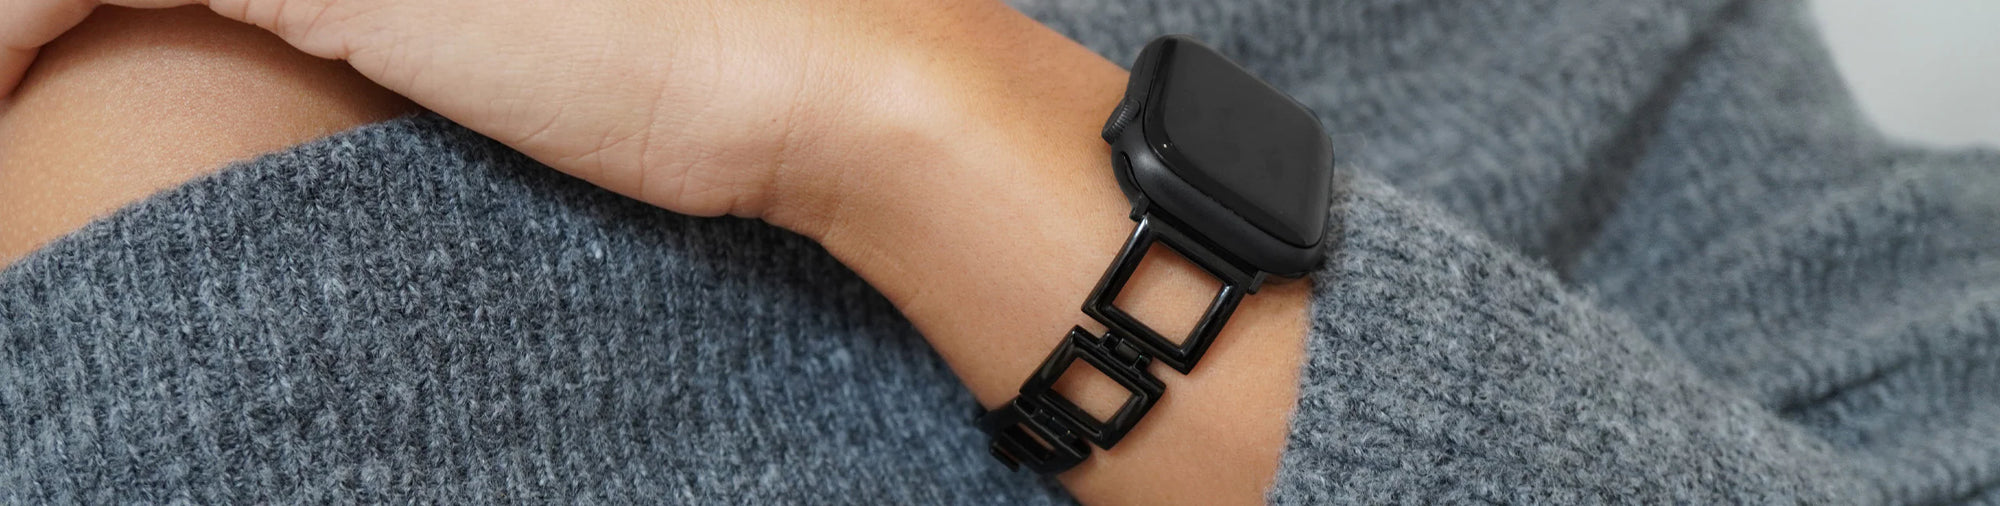 Black Bands for Apple Watch